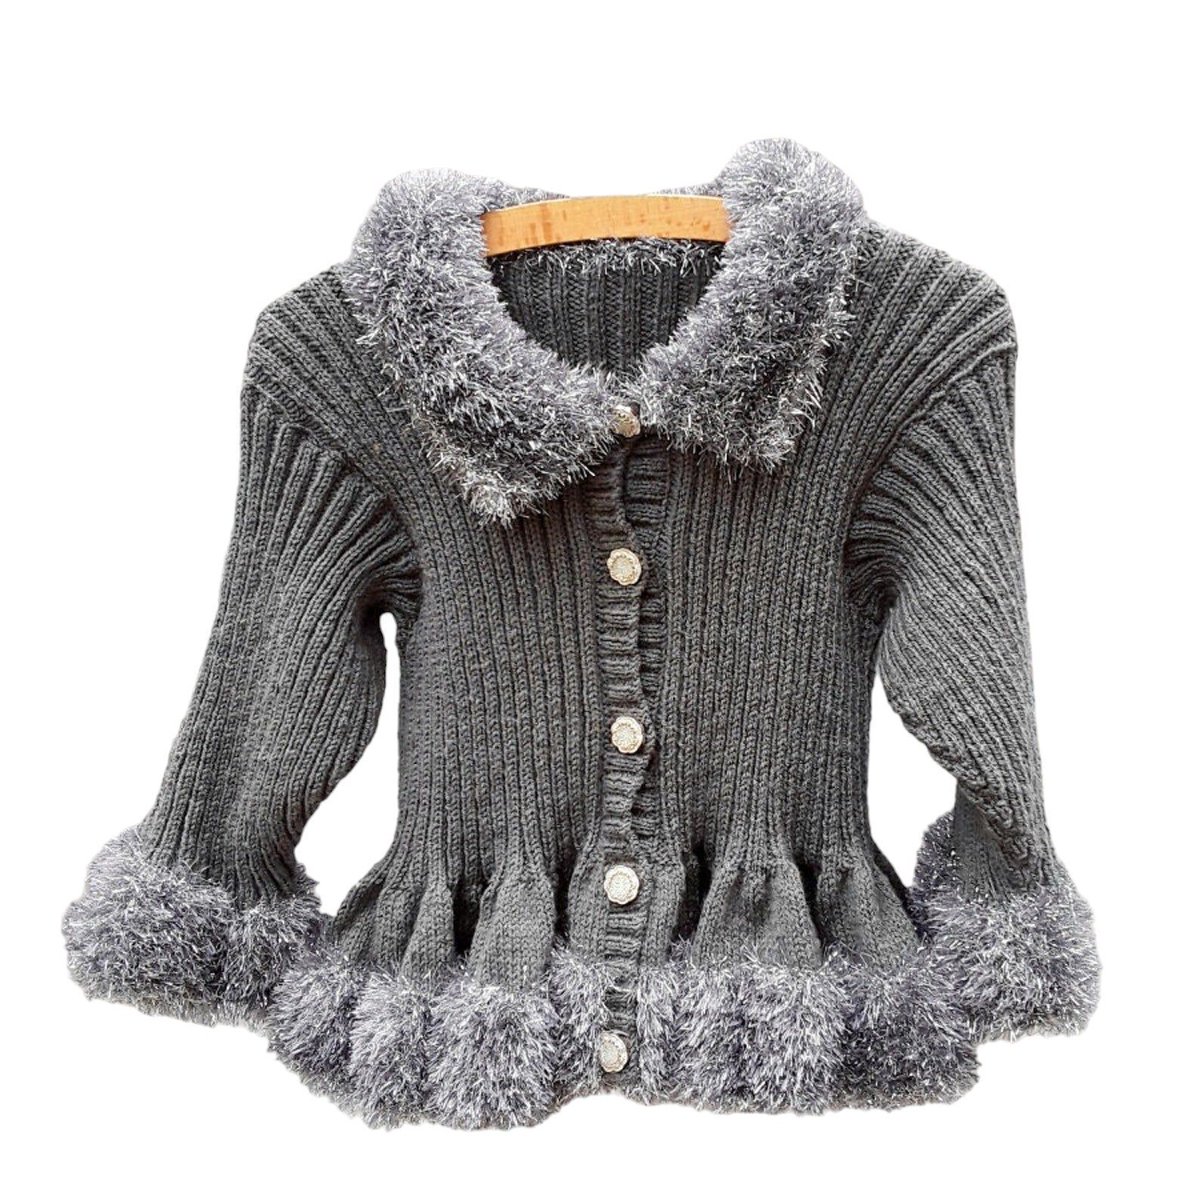 Check out this adorable hand knitted girls cardigan! The sparkly tinsel yarn trim adds a touch of glamour. Perfect for little fashionistas. Get yours now on #Etsy. #knittingtopia #buybritish knittingtopia.etsy.com/listing/168055… #craftbizparty #MHHSBD #girlsknitwear